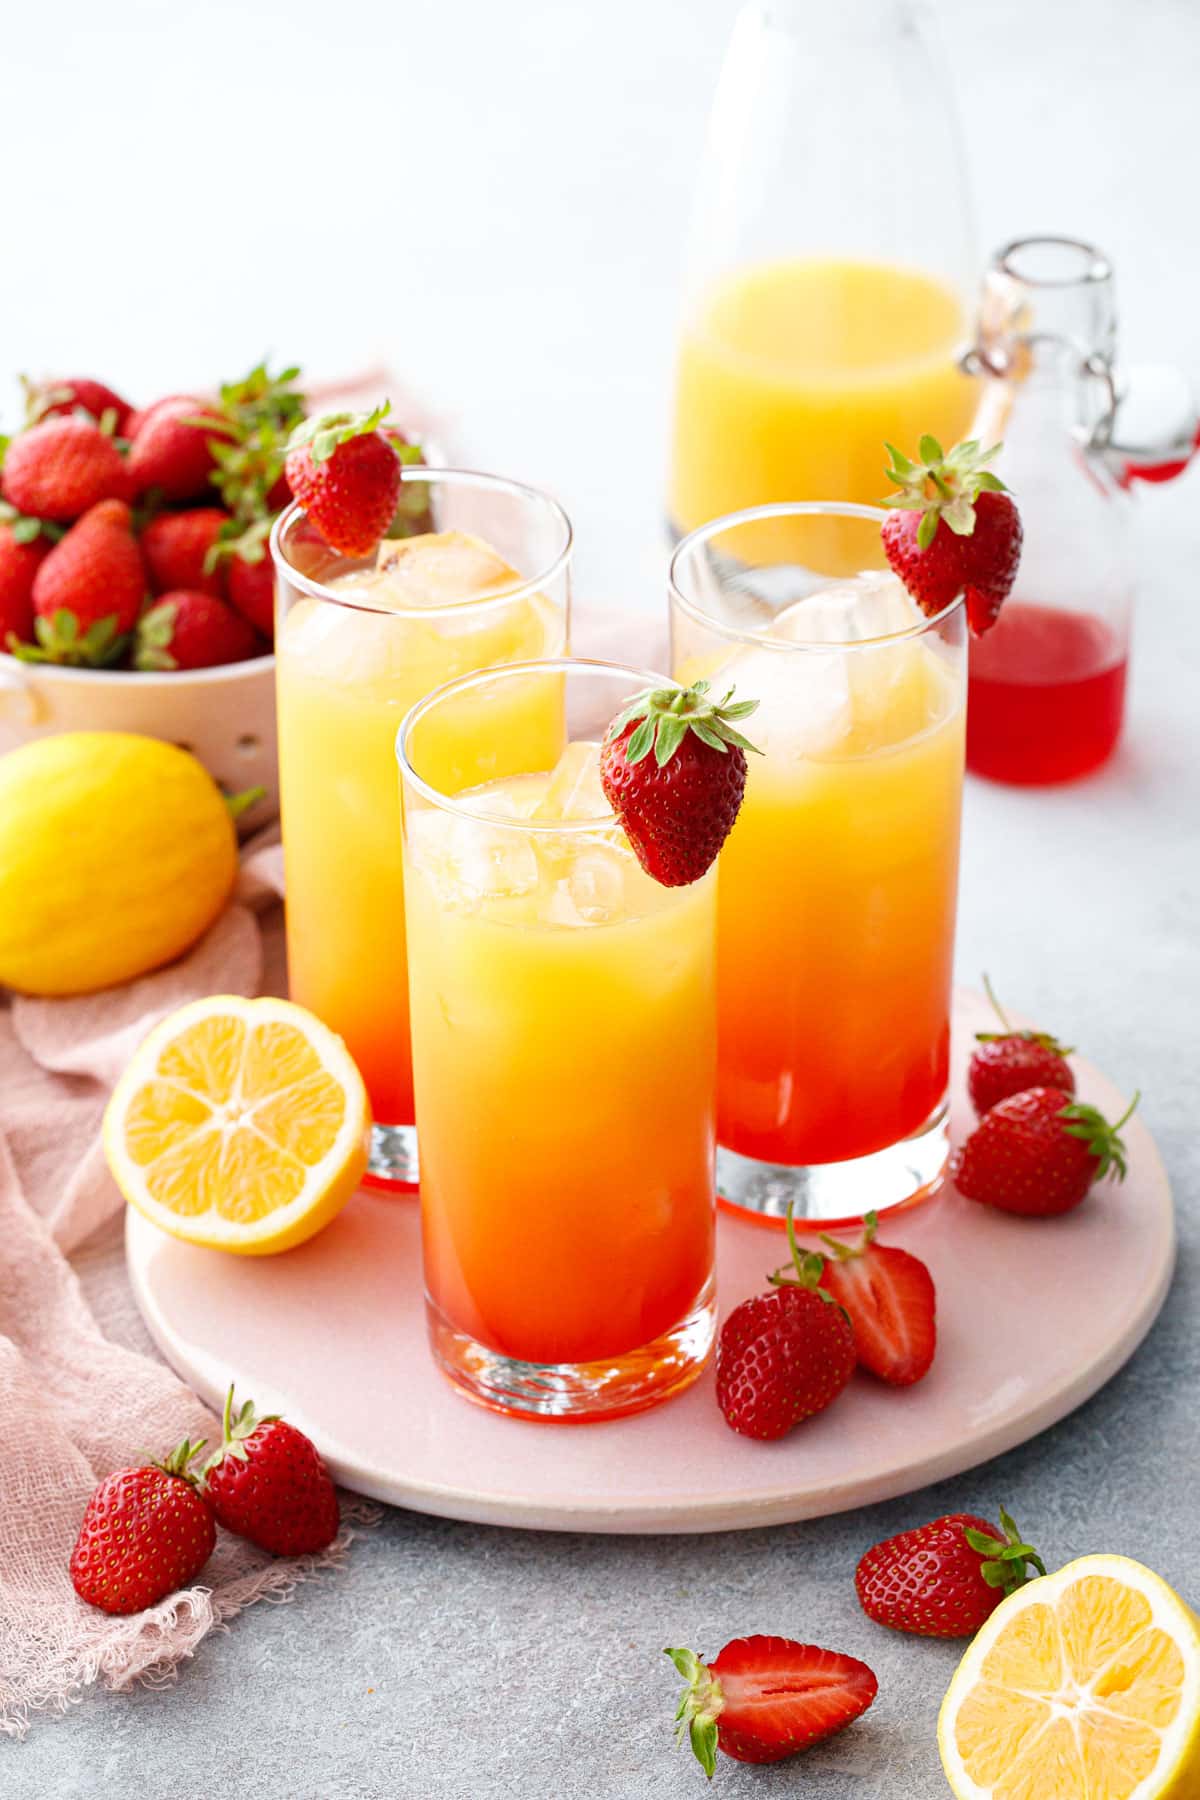 Three glasses with Strawberry Passionfruit Lemonade, ombre colored with red at the bottom and yellow at the top, with lemons and strawberries scattered around.